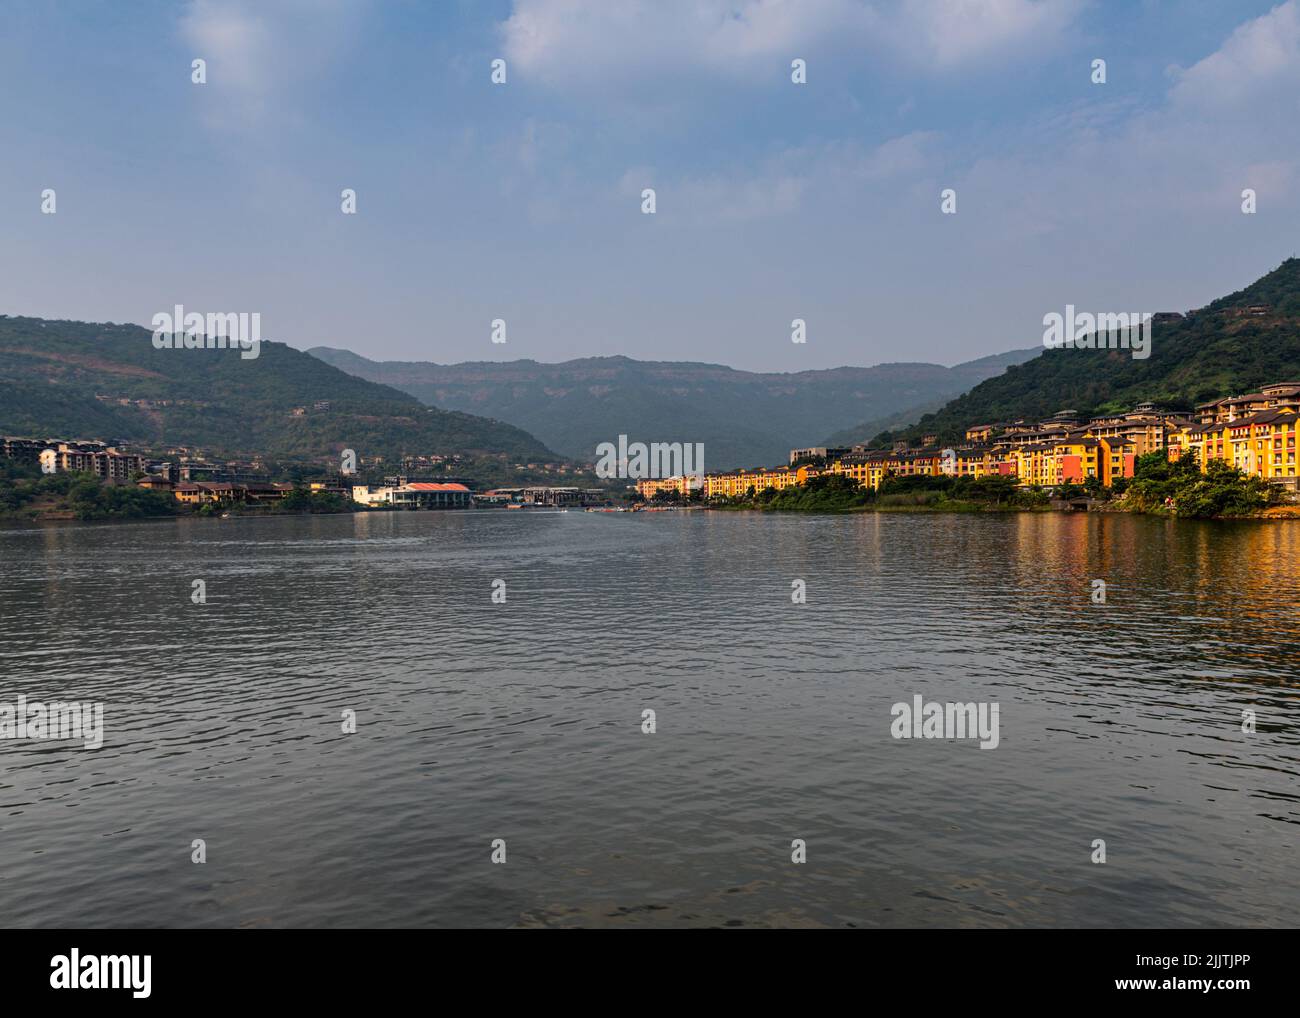 A beautiful view of the Lavasa city on the shore of the lake in India with hills in the background Stock Photo